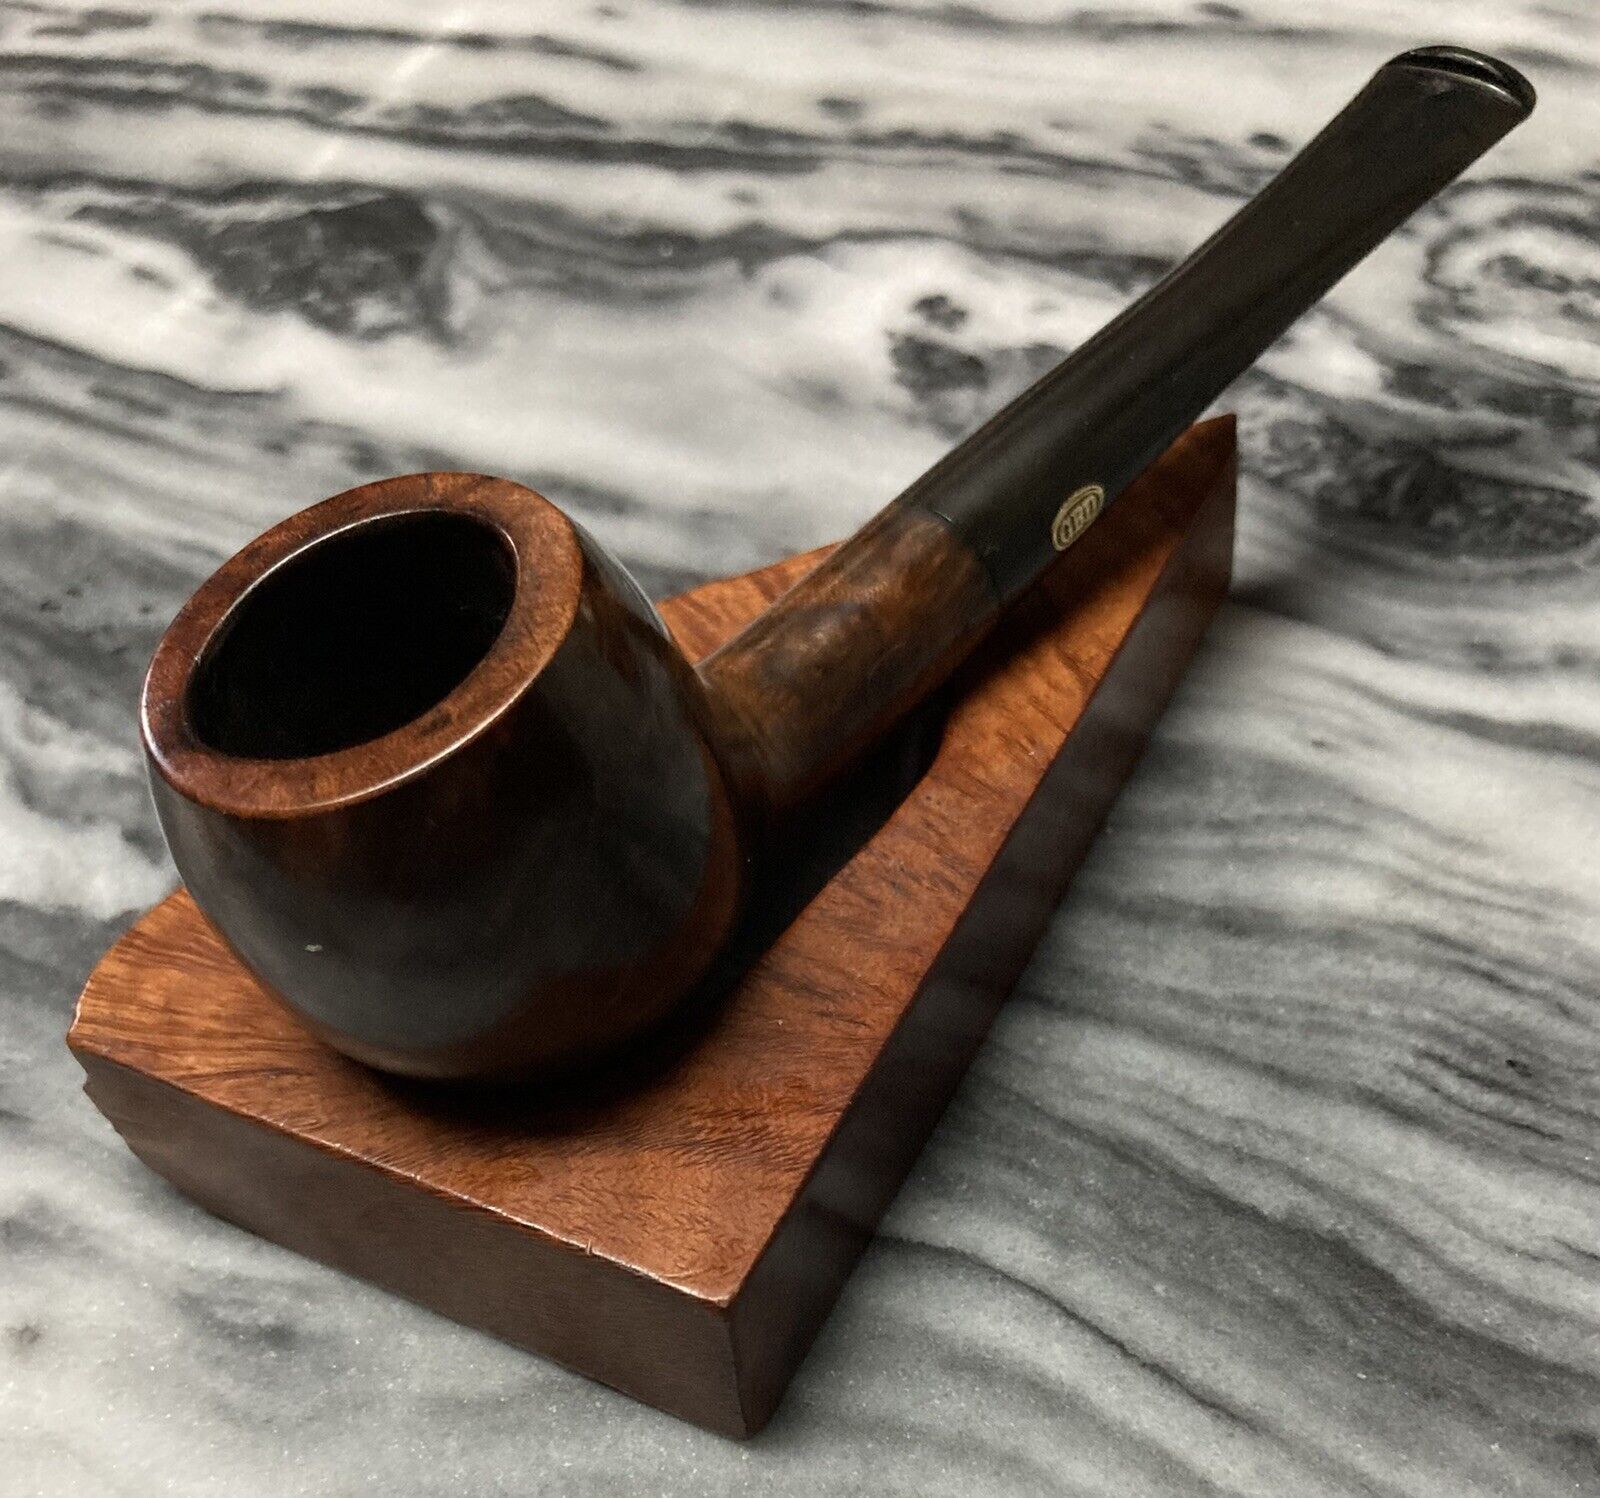 Vintage Estate GBD International Apple Pipe 3111-Compact & Nicely Crafted